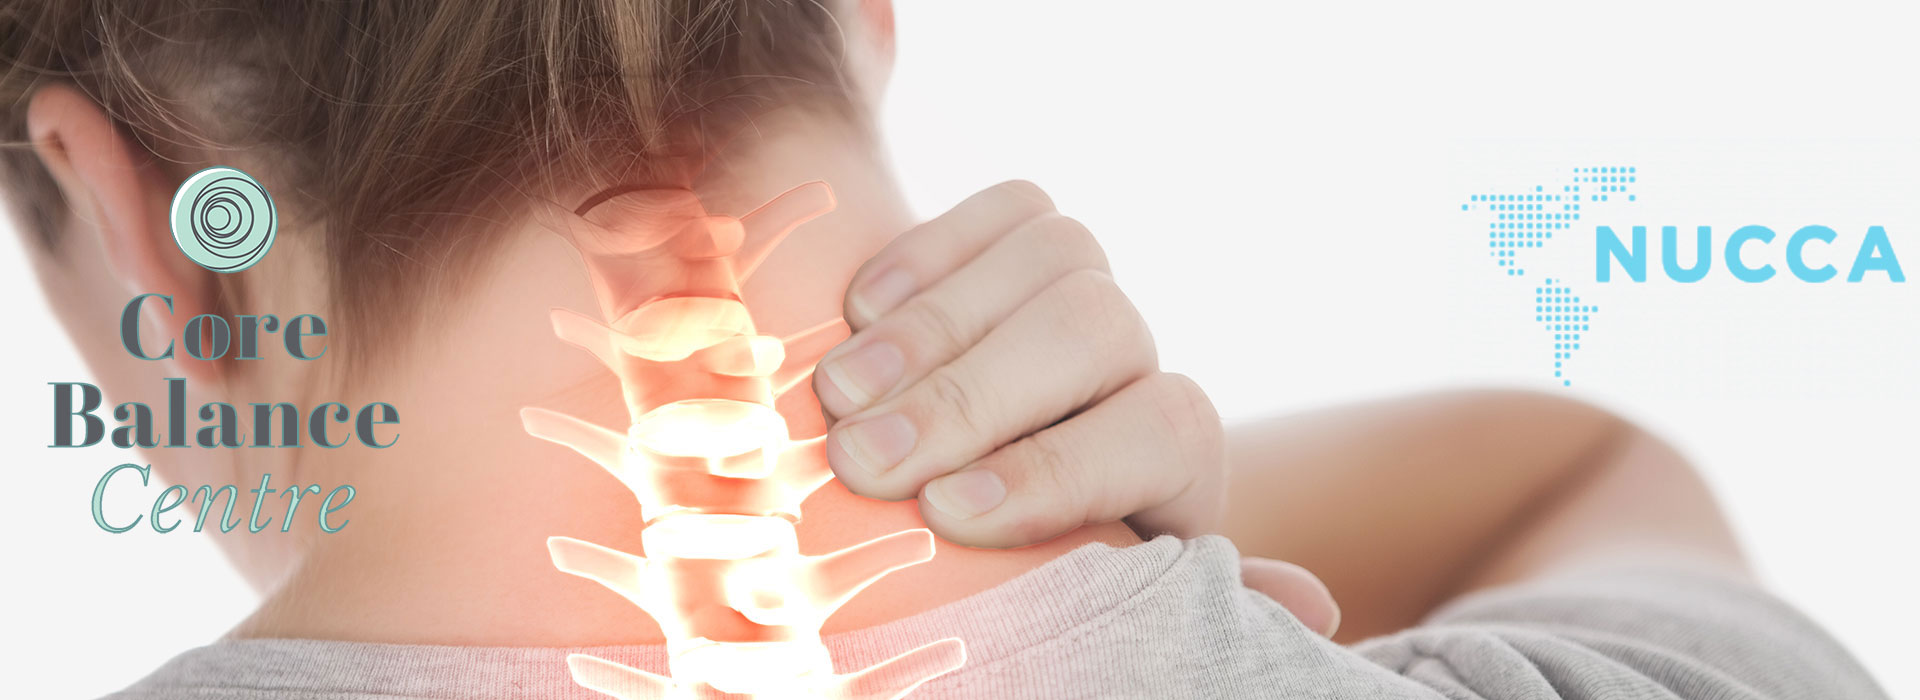 Dr. Michelle Speranza, an Airdrie NUCCA chiropractor specializing in Upper Cervical Care, can help relieve neck and back pain..